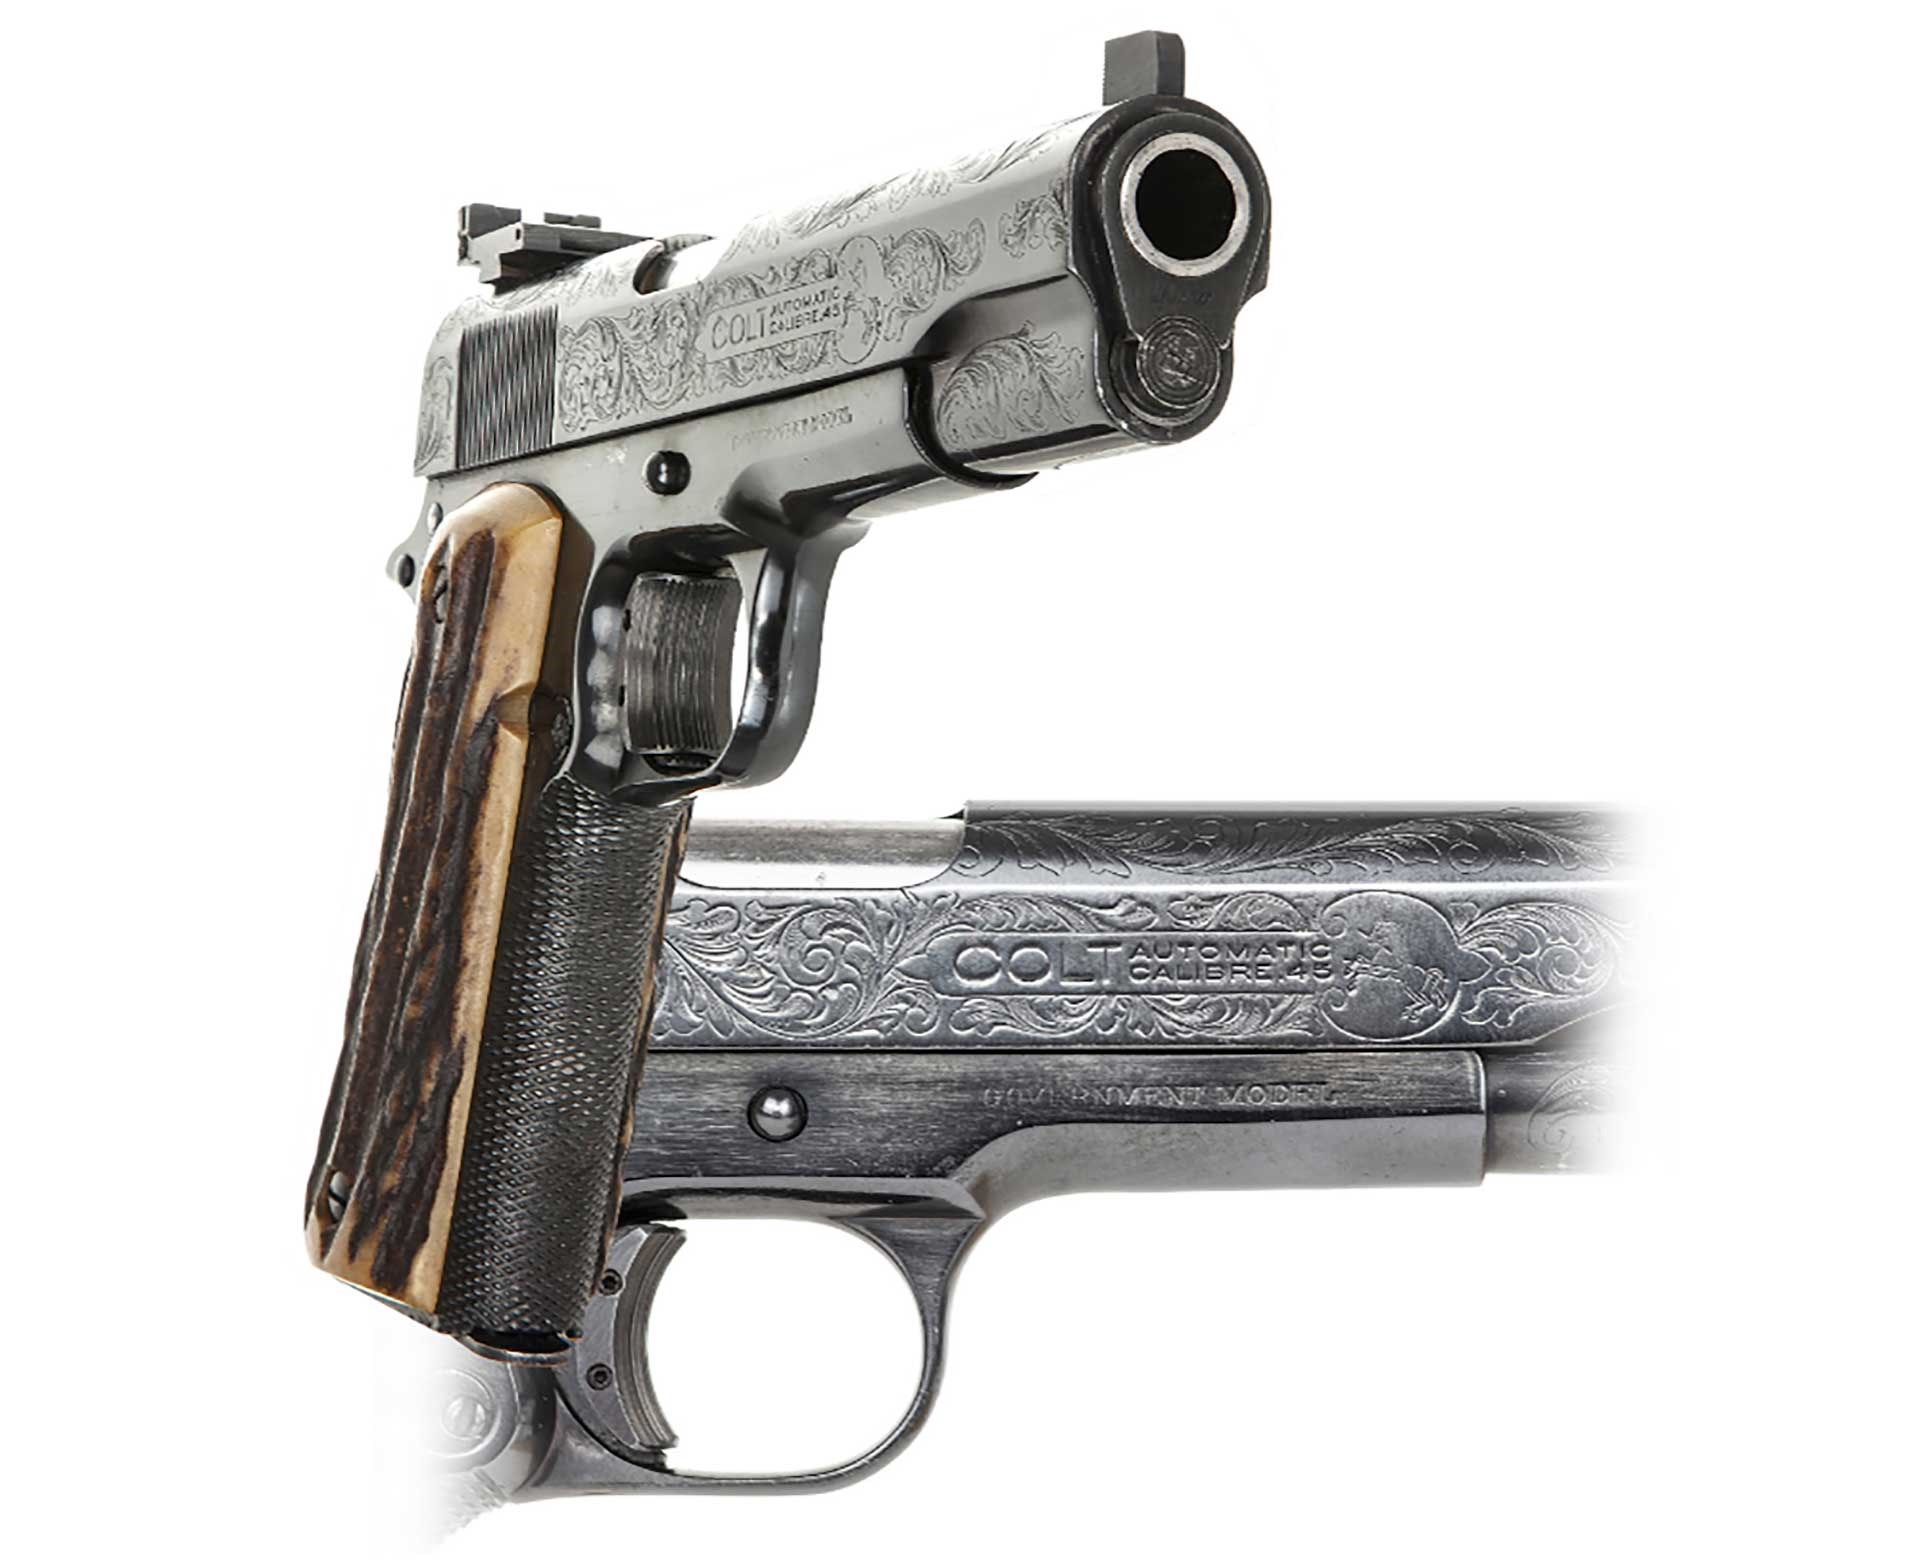 Al Capone's personal 1911 shown from the front and the side, displaying figurative engraving.